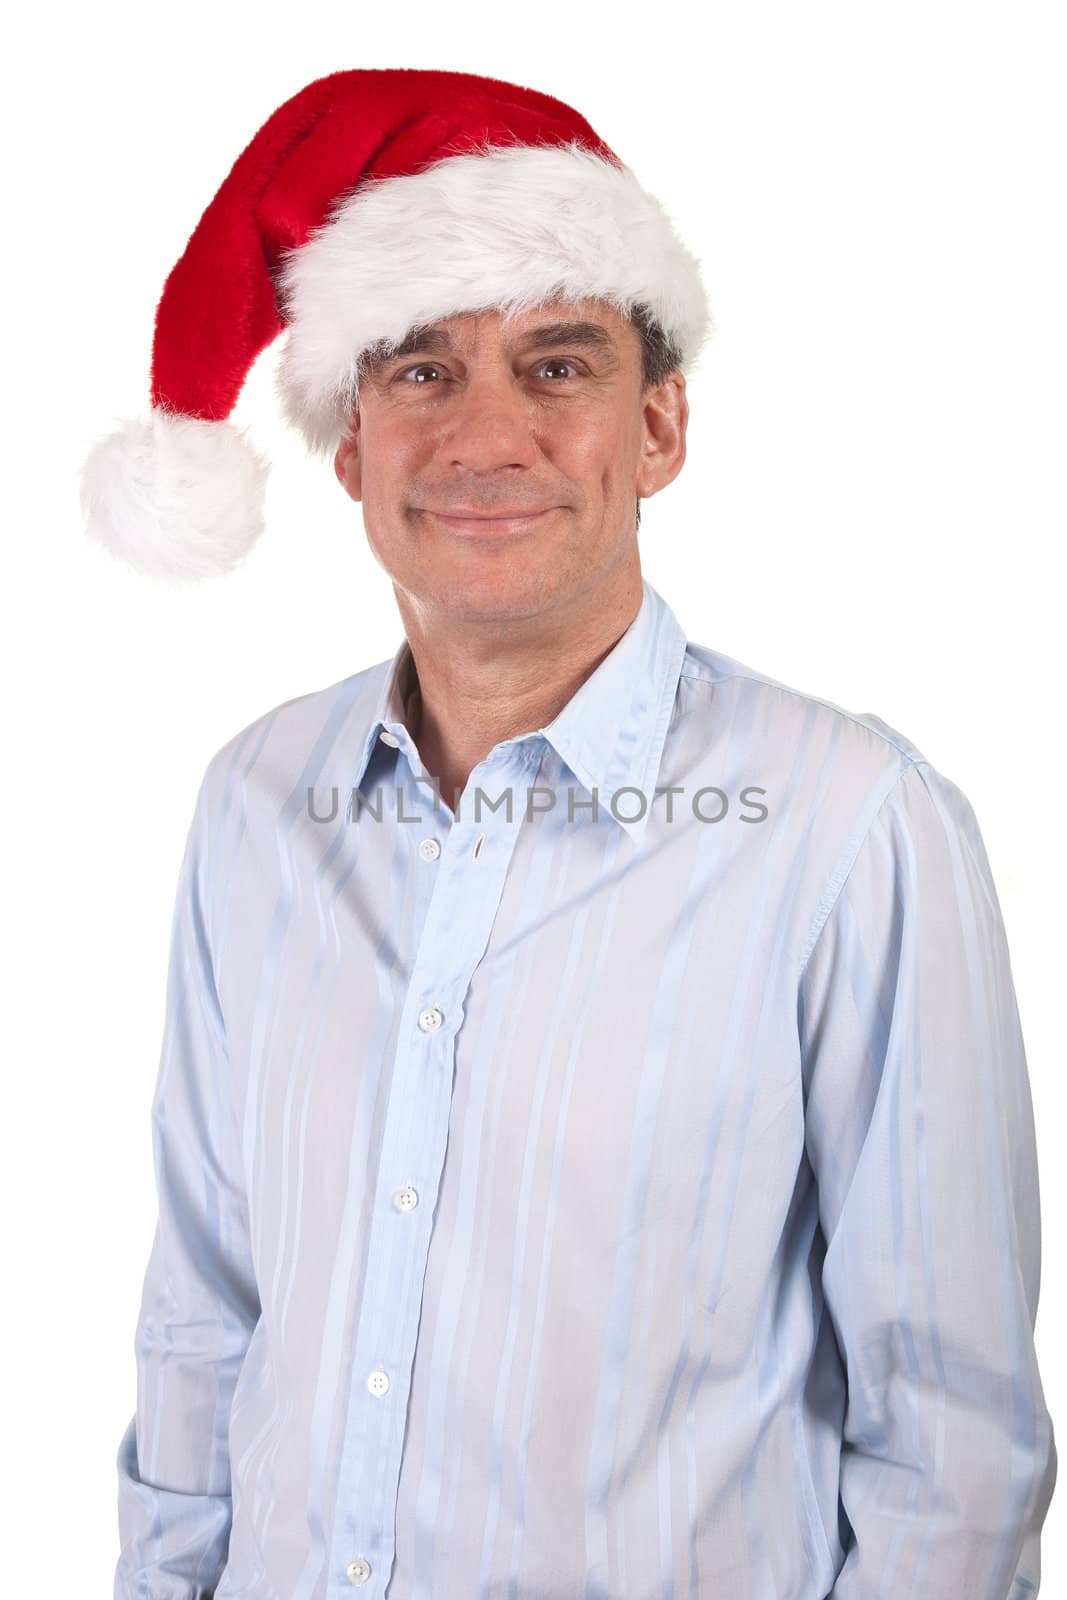 Portrait of Smiling Handsome Middle Age Busuness Man in Christmas Santa Hat Isolated